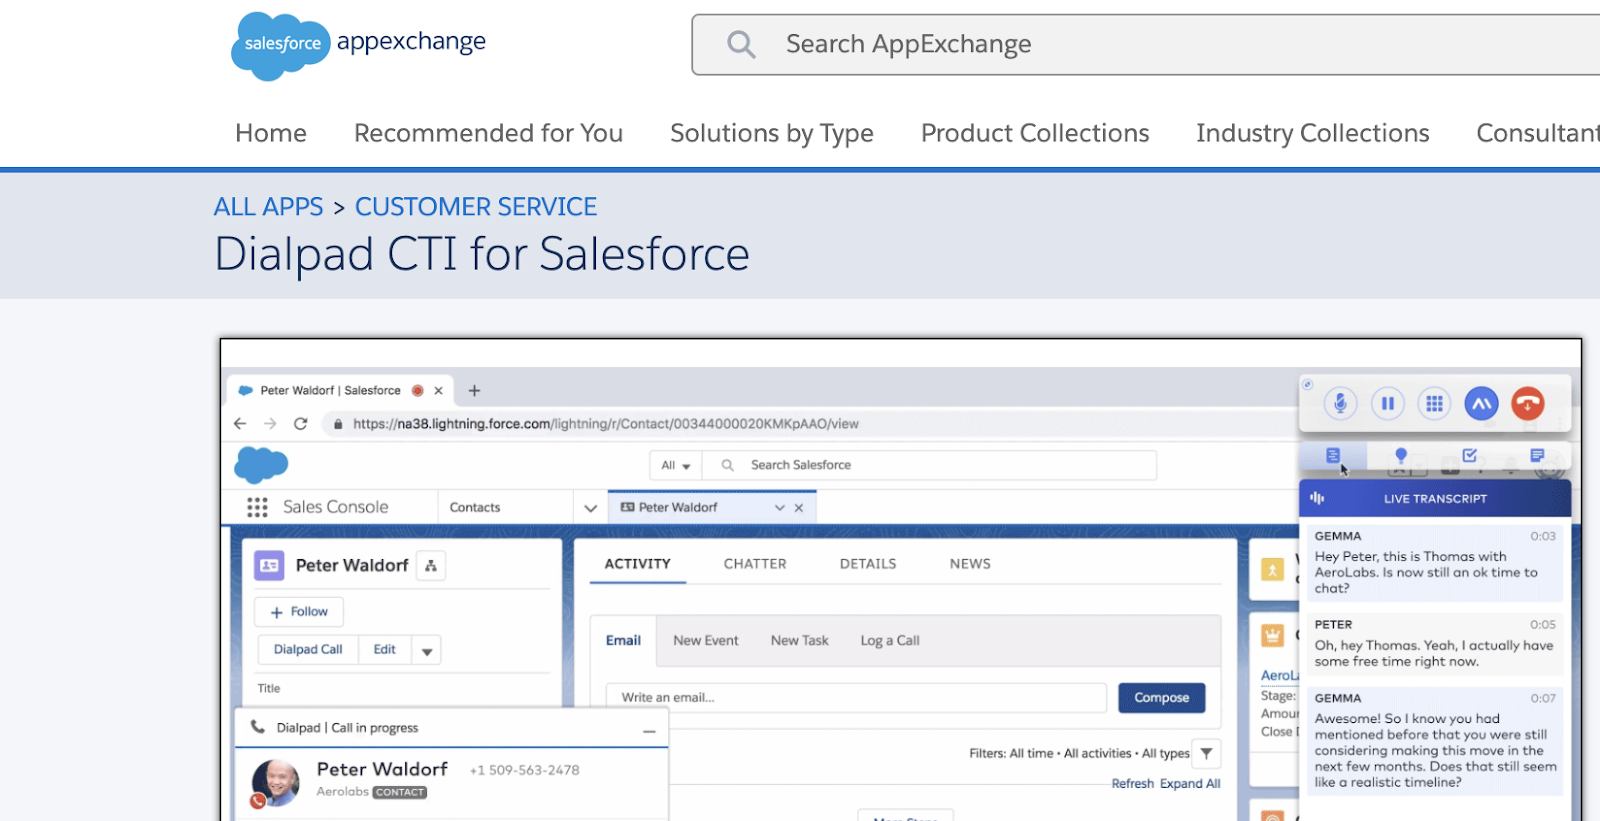 sfdc-omnichannel-article-1.png